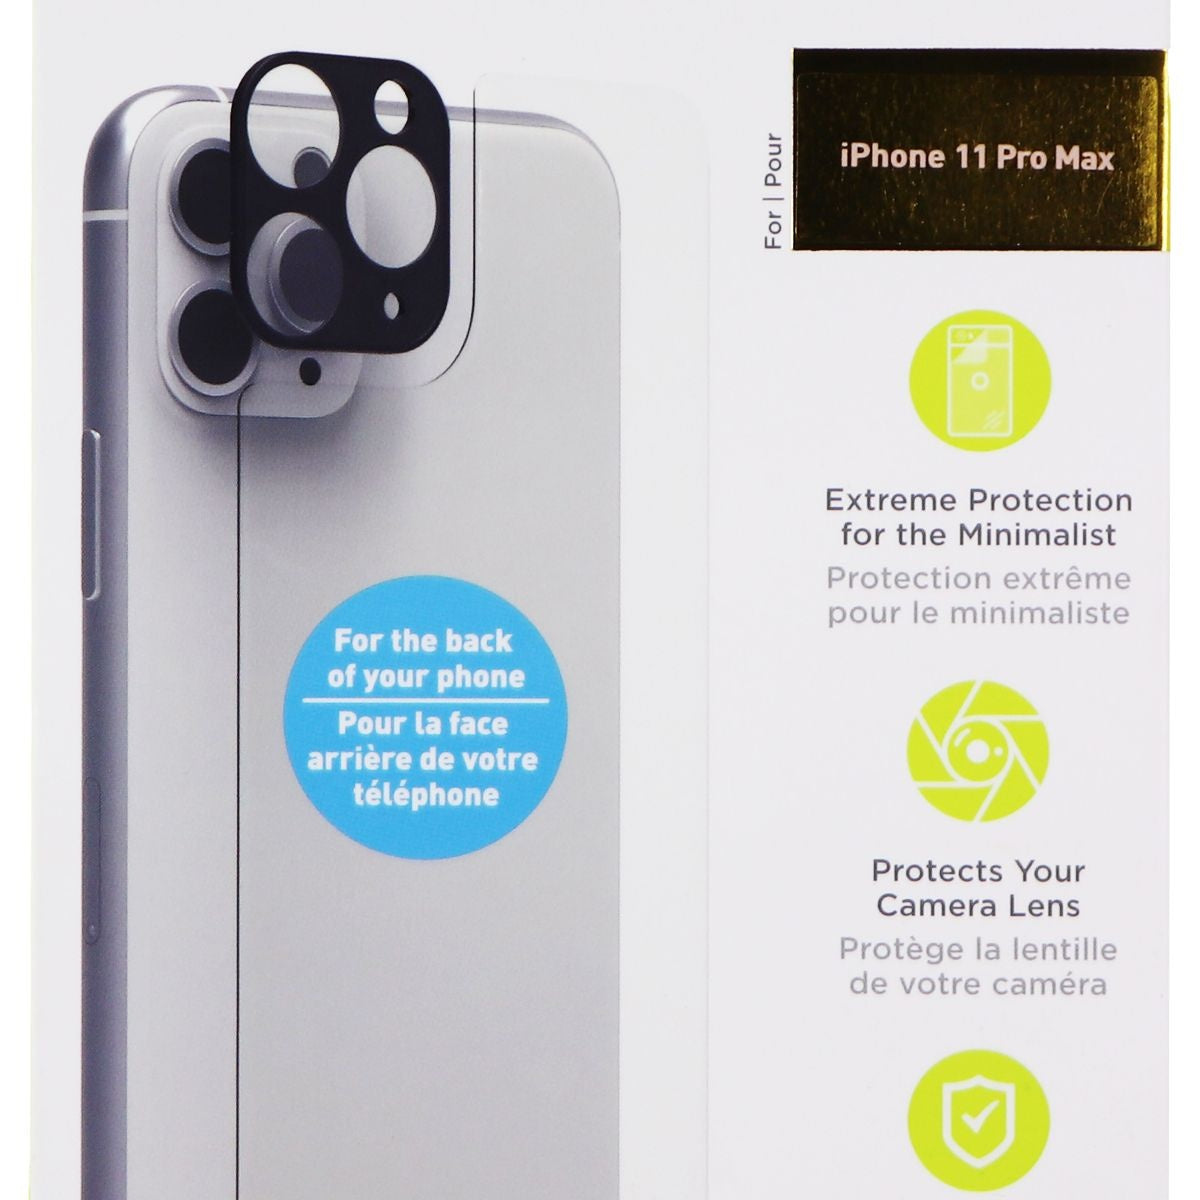 PureGear Extreme Impact Back Panel & Camera Protector for iPhone 11 Pro MAX Cell Phone - Screen Protectors PureGear    - Simple Cell Bulk Wholesale Pricing - USA Seller